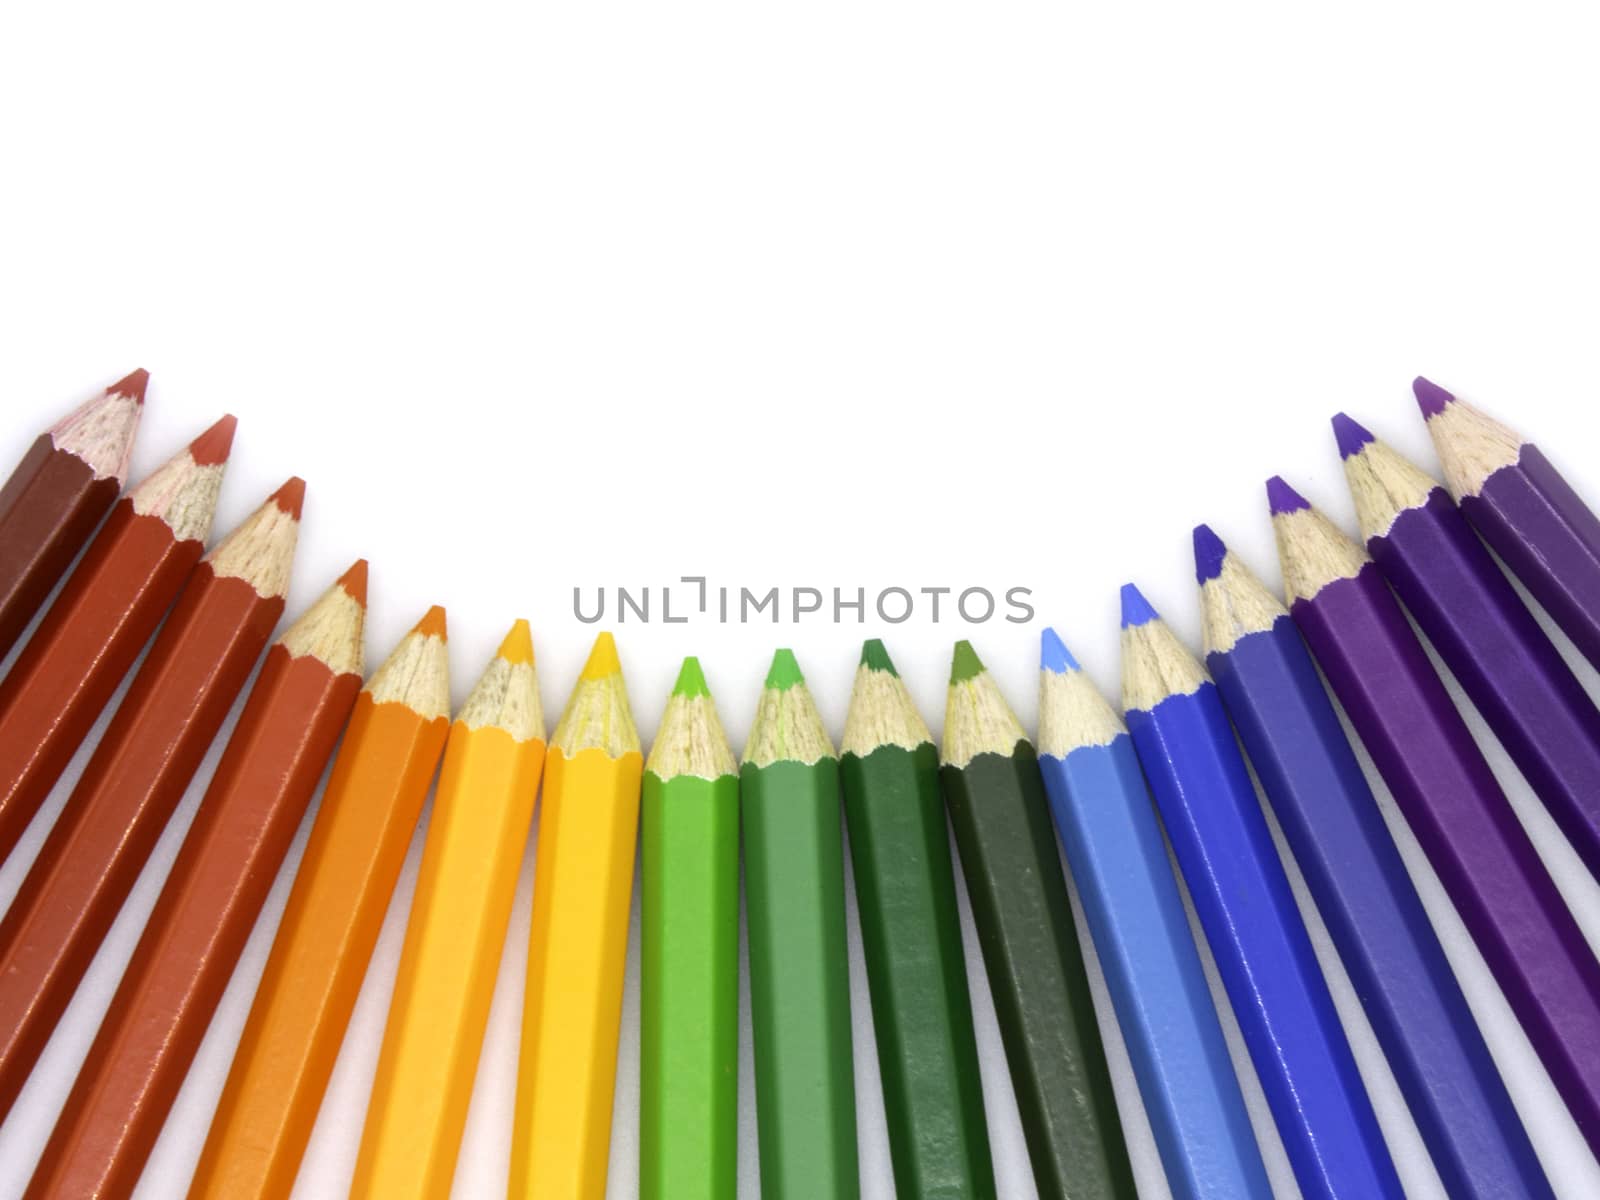 Color pencils isolated on white background with copy space for insert text.